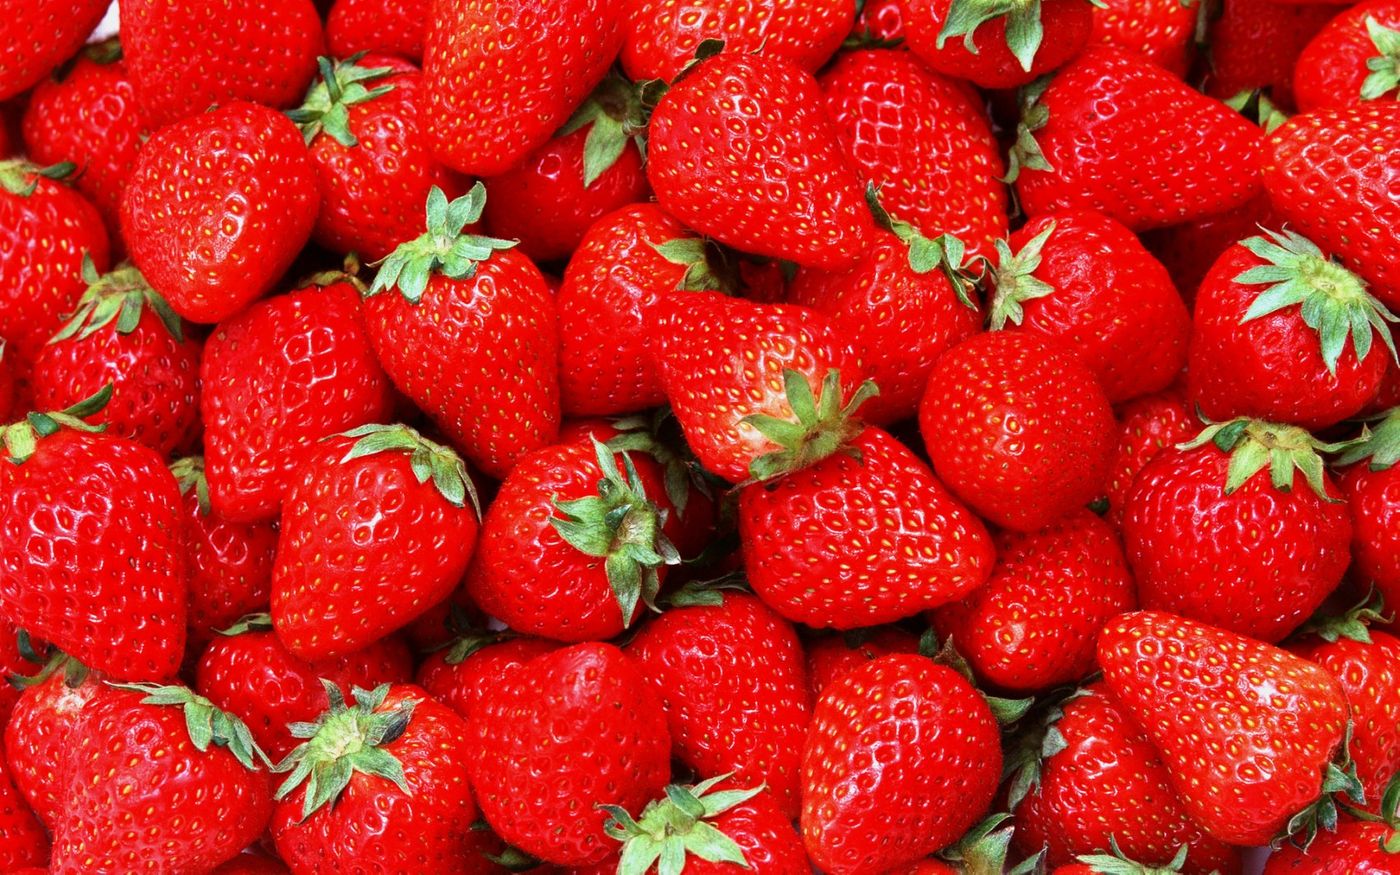 Typically, perishable foods like strawberries need to be refrigerated so they stay fresh. New tech may change that.